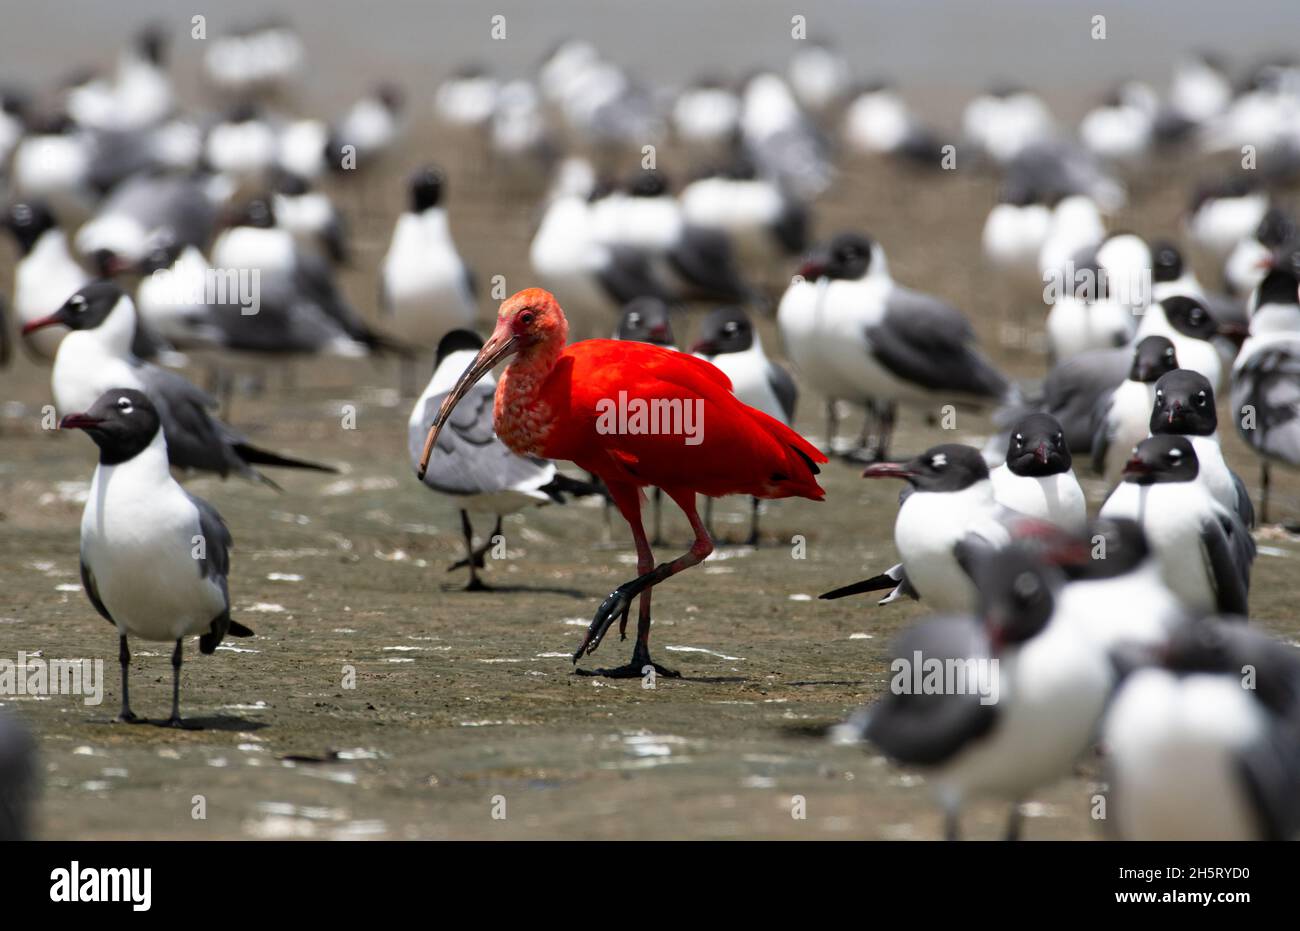 A lone Scarlet Ibis, Eudocimus ruber, national bird of Trinidad, stands out in stark contrast to the flock of Laughing Gulls. Stock Photo